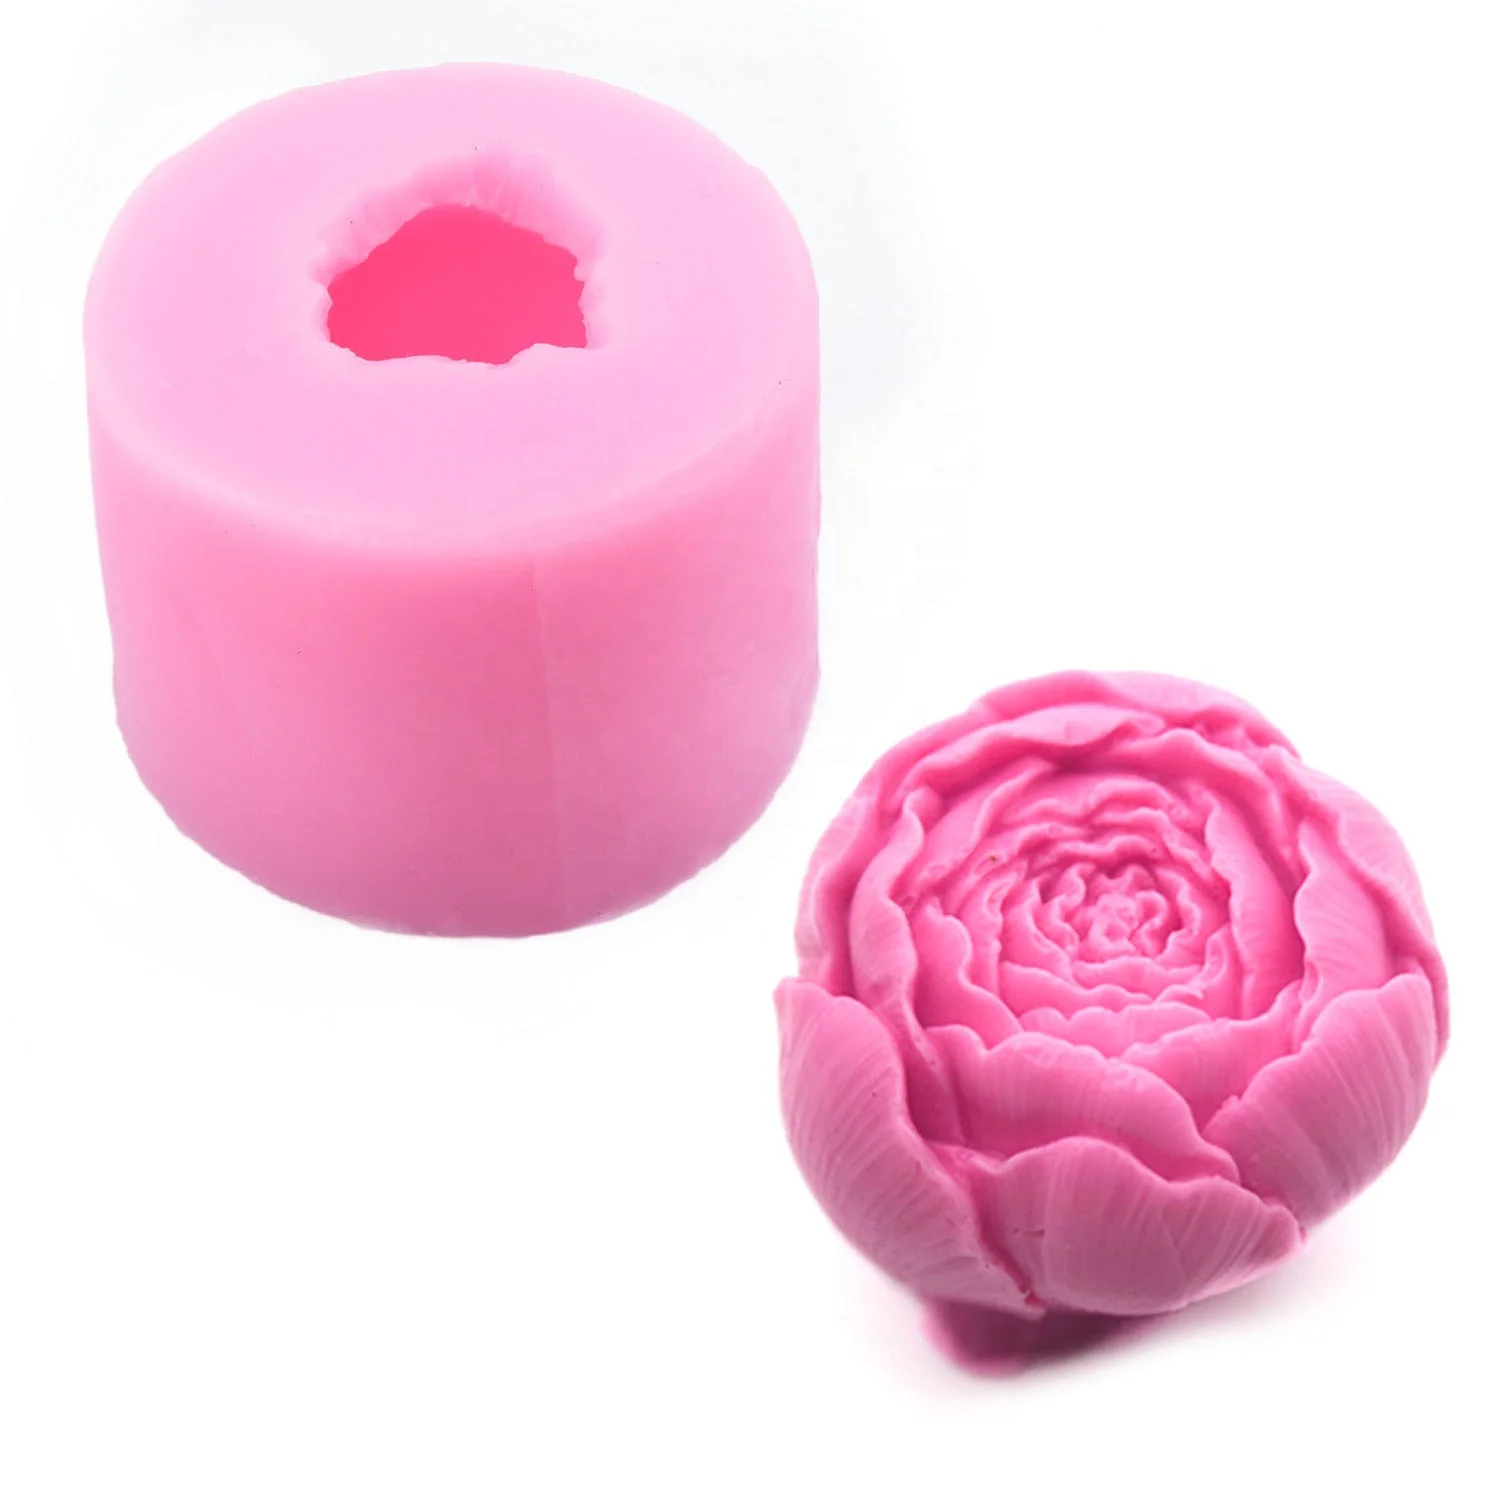 

3D Rose Flower Silicone Soap Molds fondant Chocolate Mold DIY Cake Chocolate Candy Baking Mould Molds Handmade Craft, White and pink